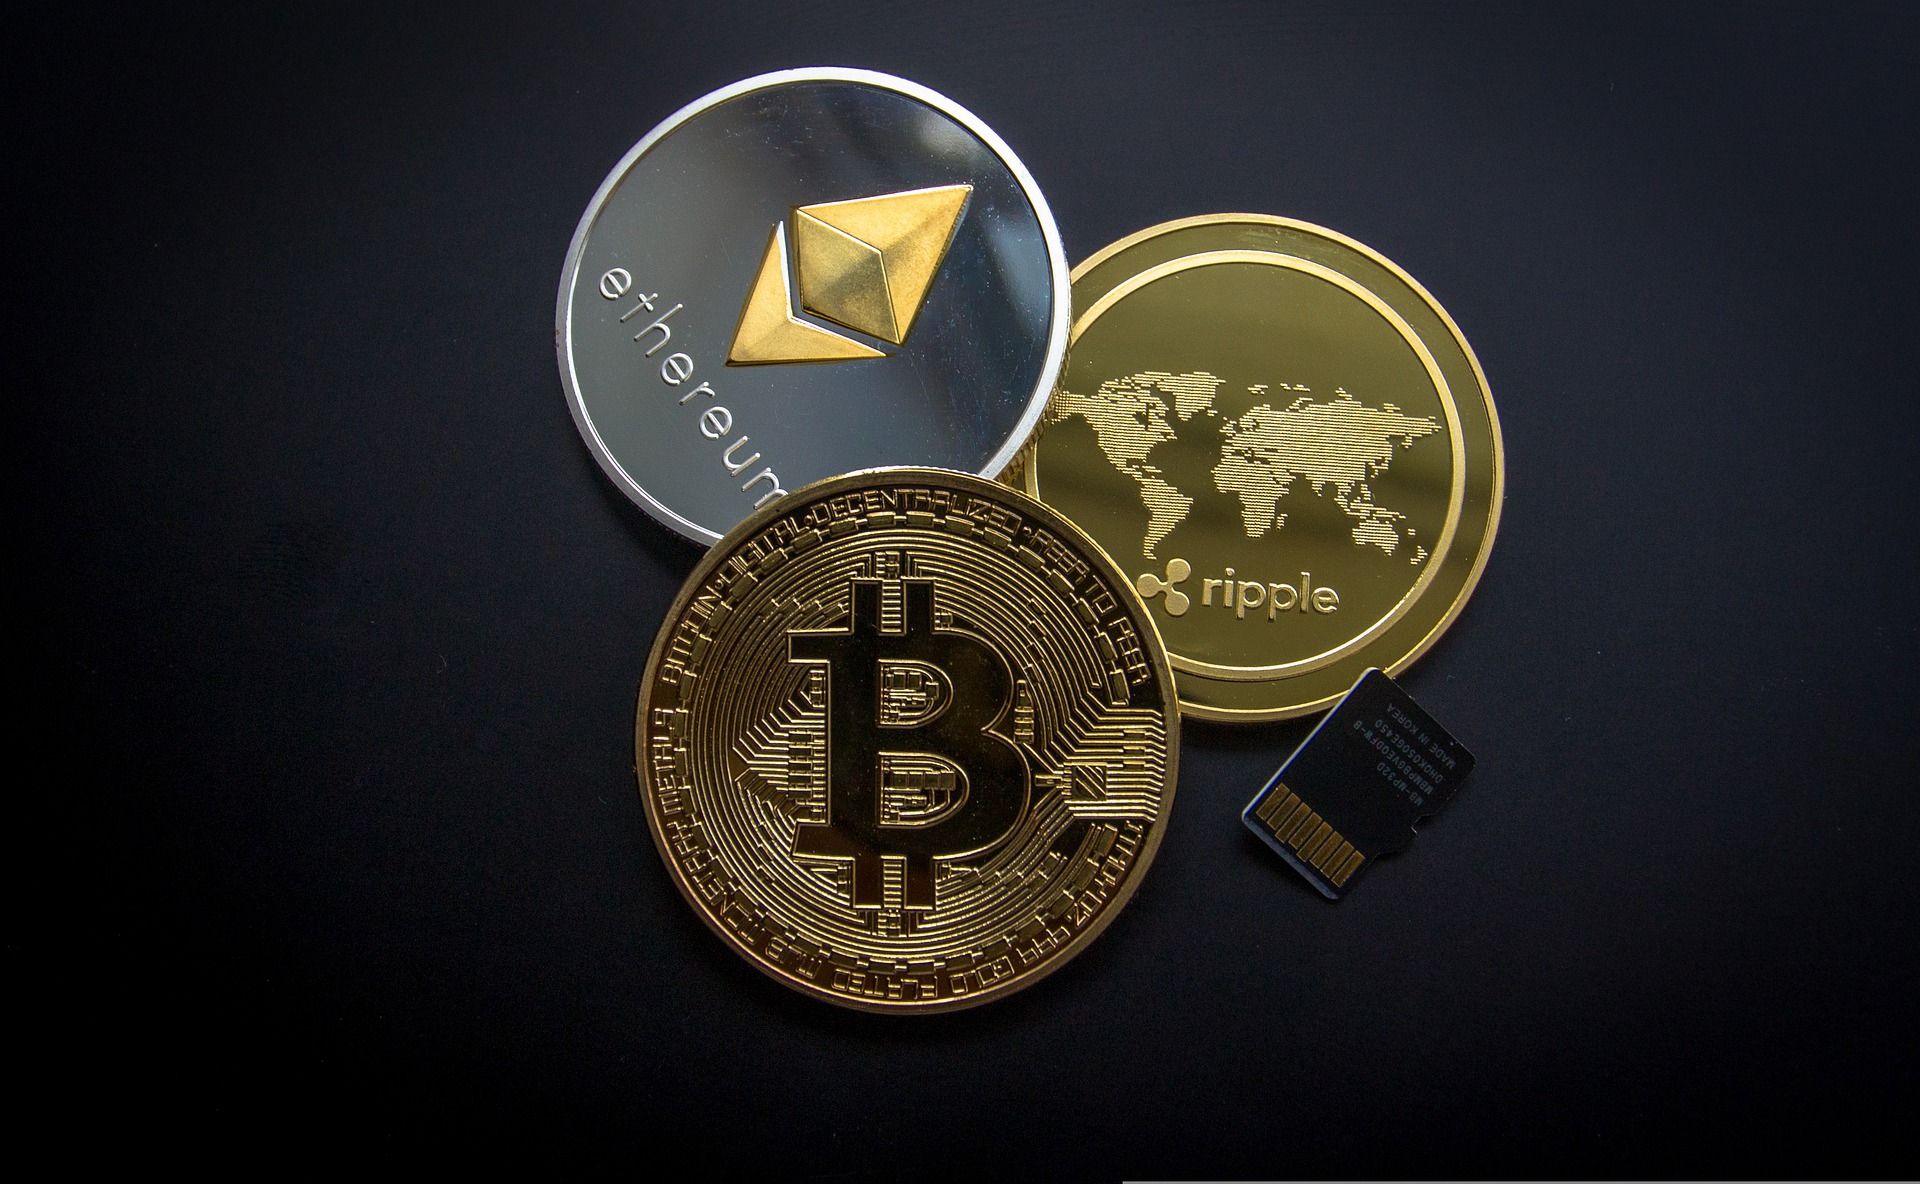 Top 5 cryptocurrencies of the day: Bitcoin down 1%, FTX Token trends at no. 1